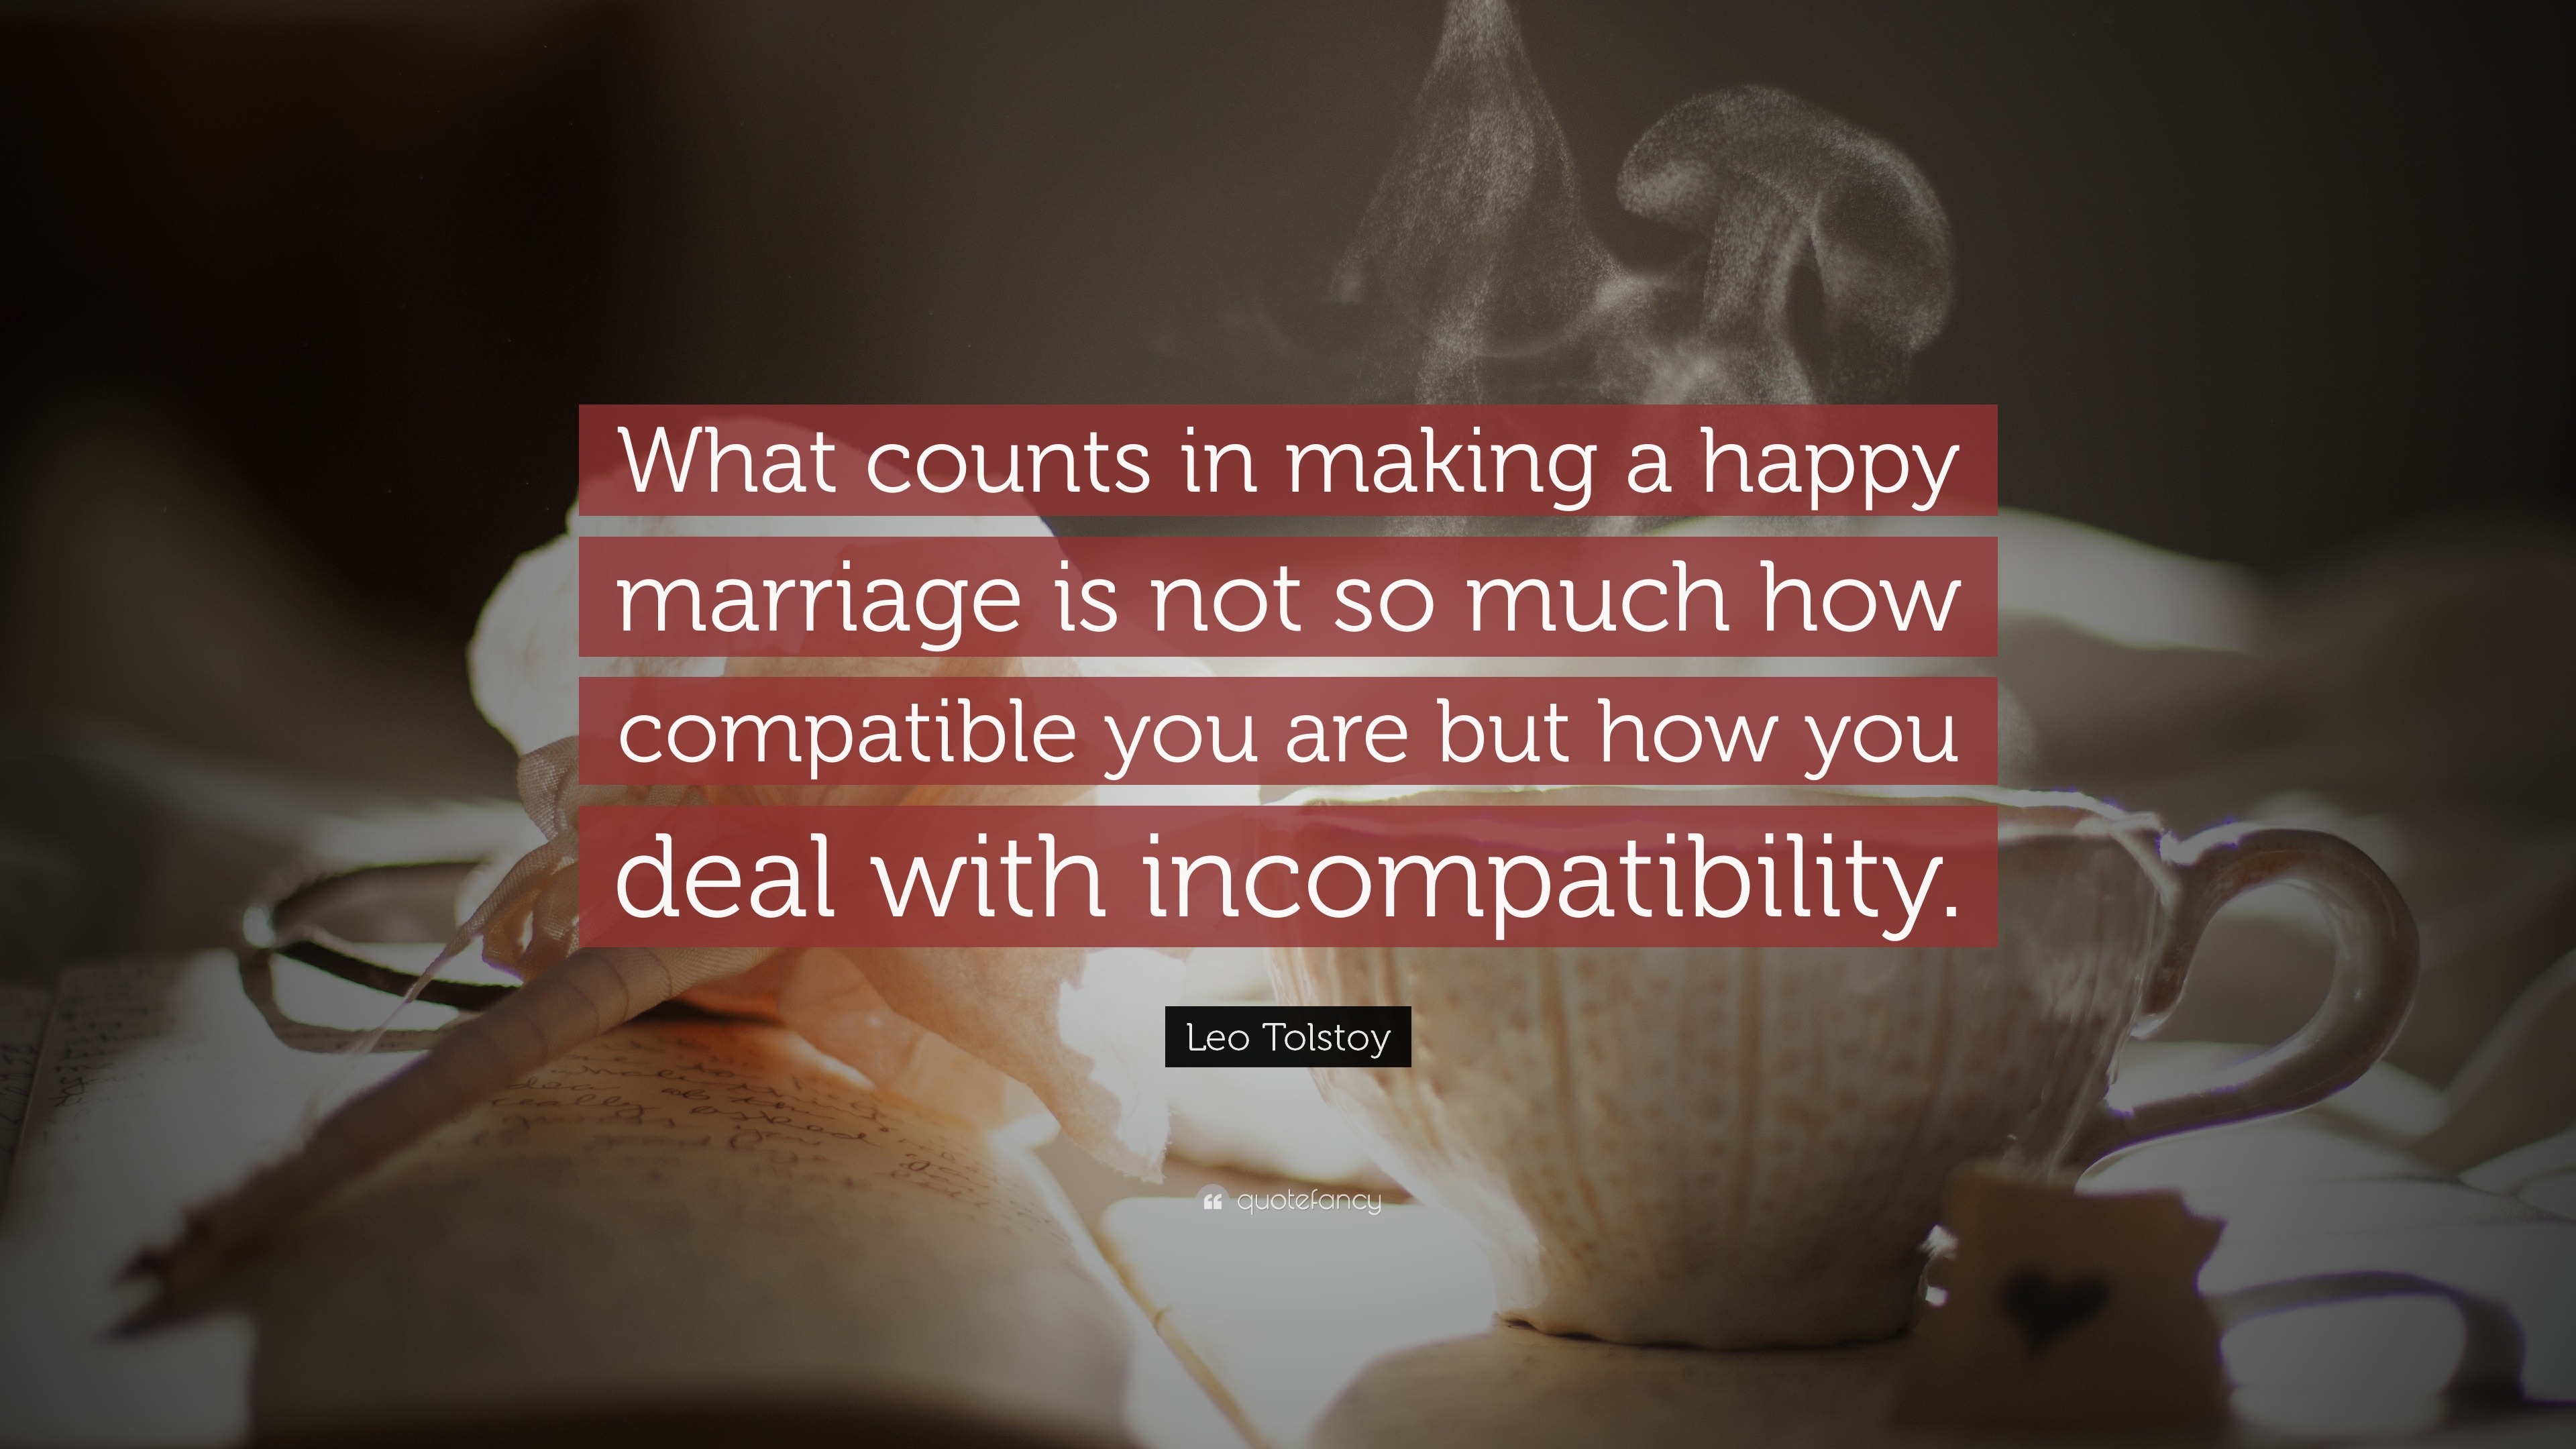 Marriage Quotes “What counts in making a happy marriage is not so much how